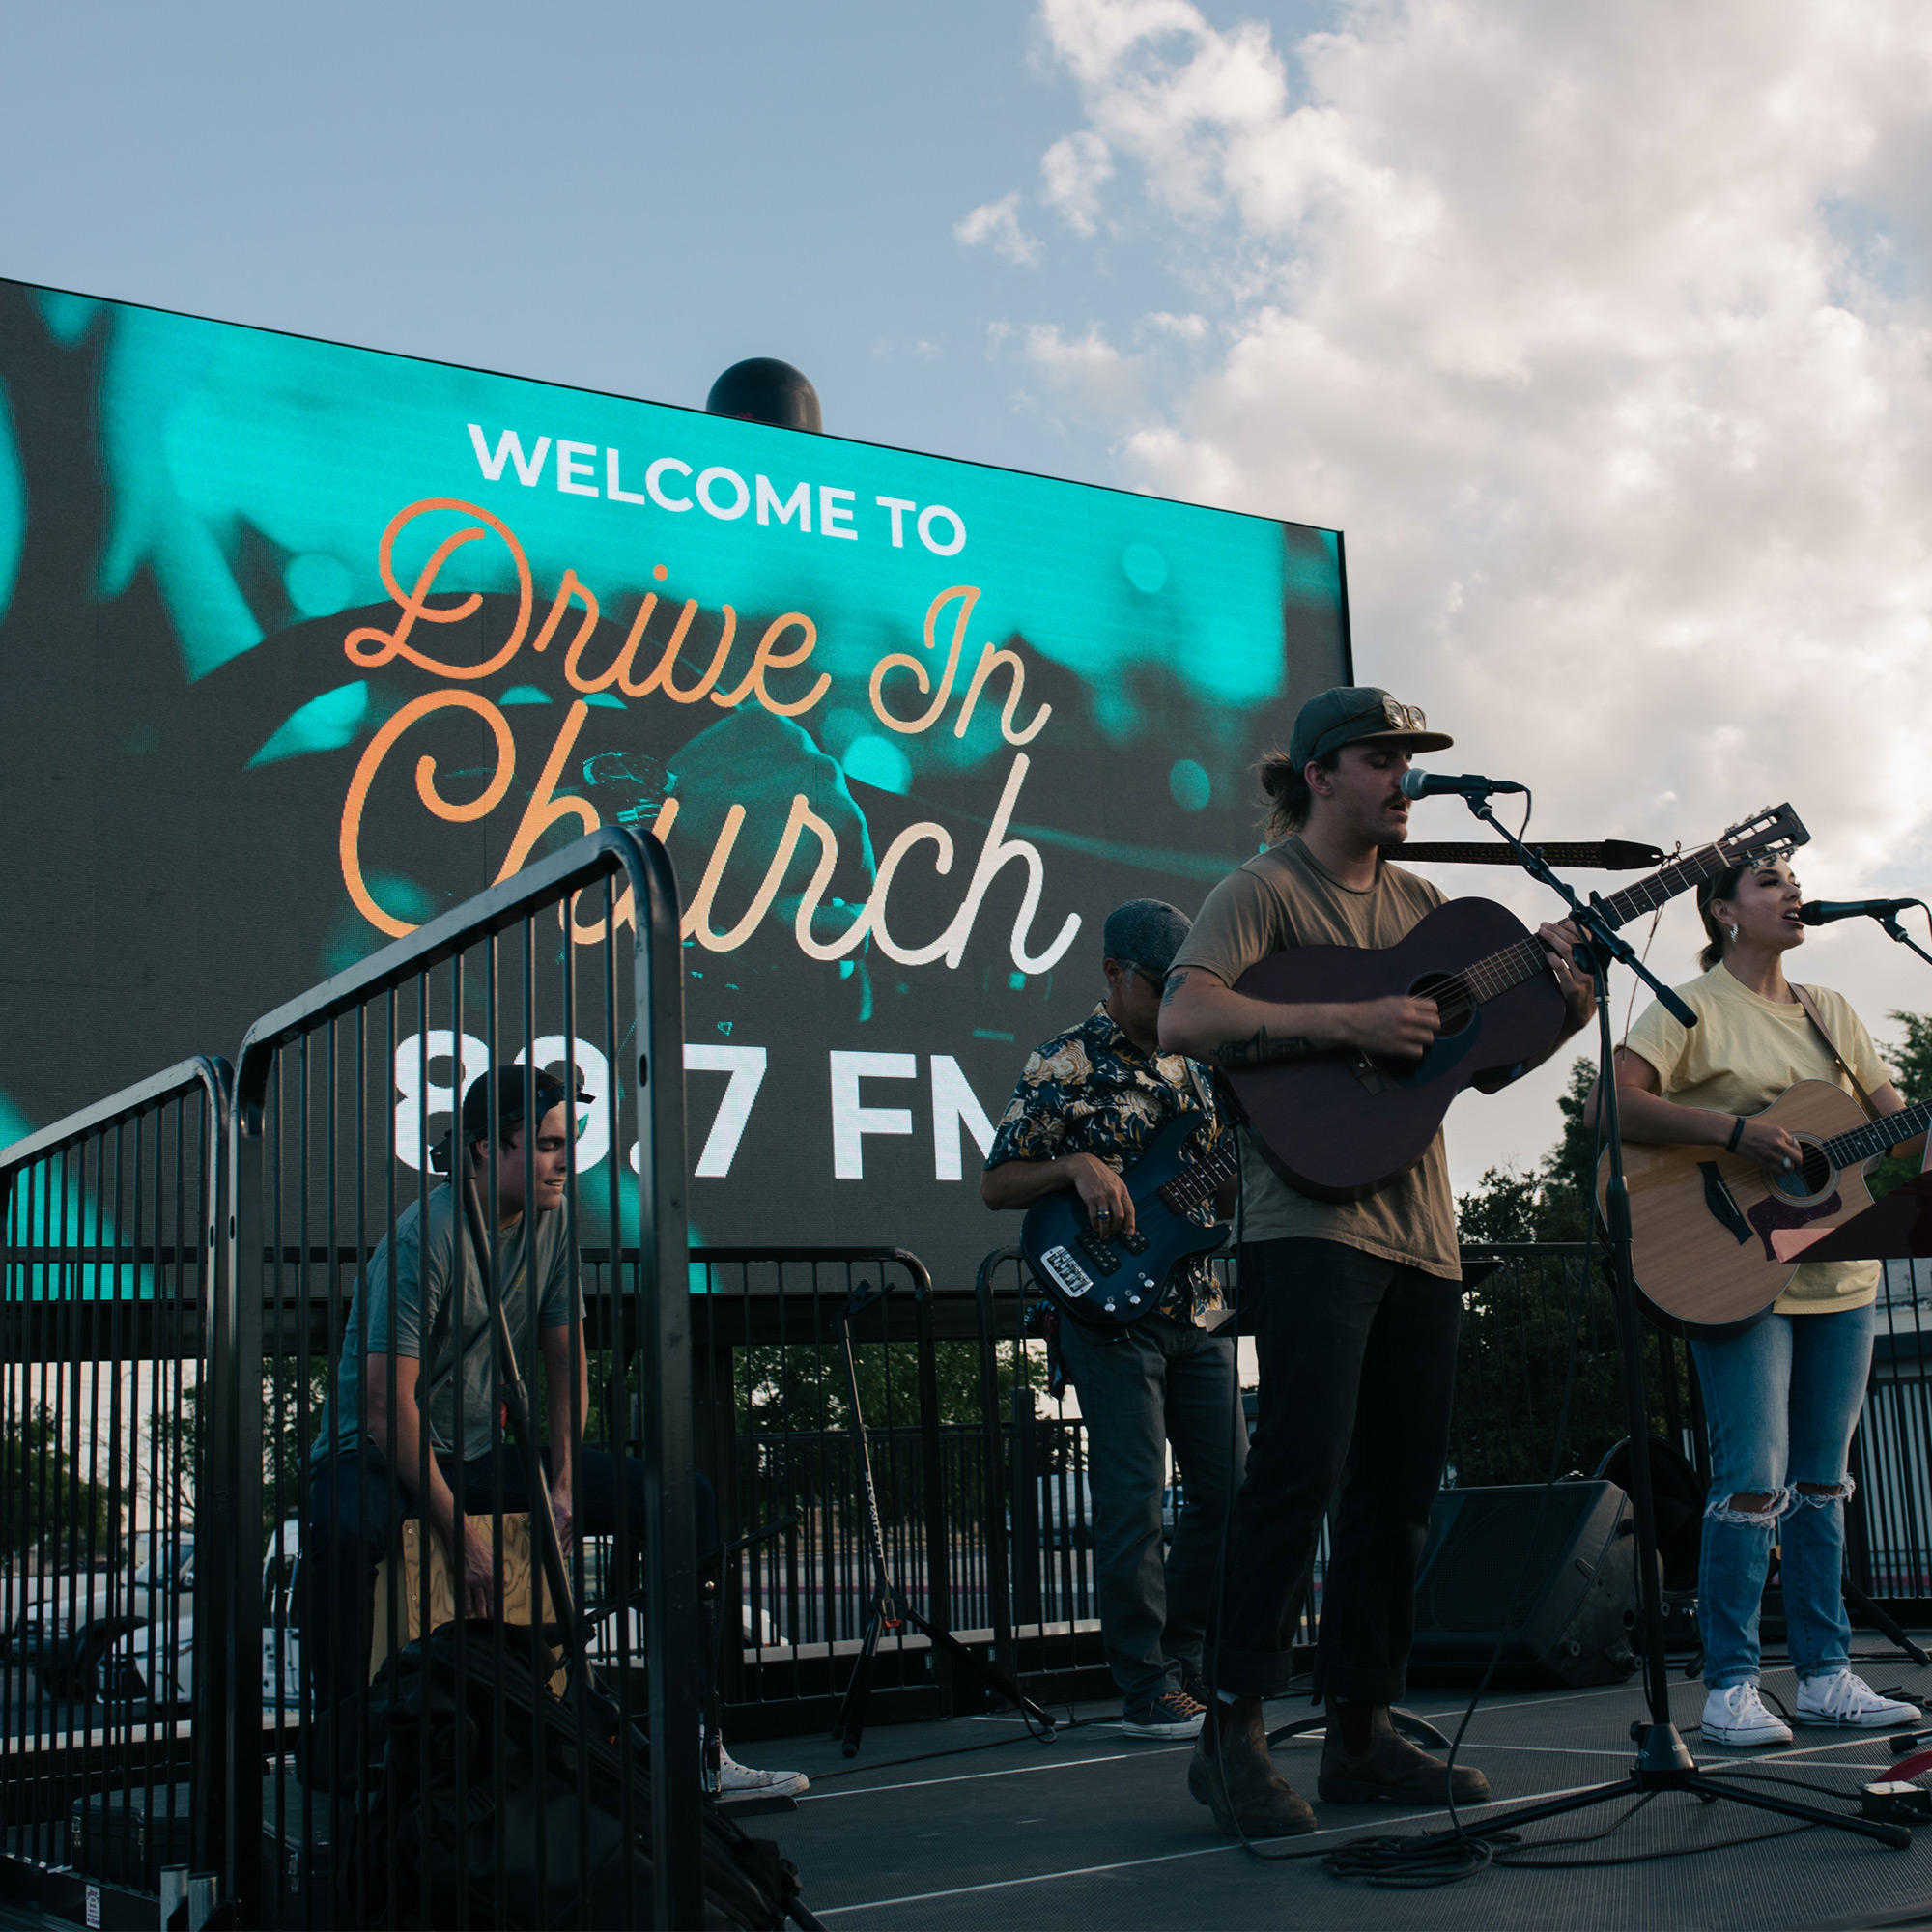 FunFlicks® LED trailer at an outdoor church concert